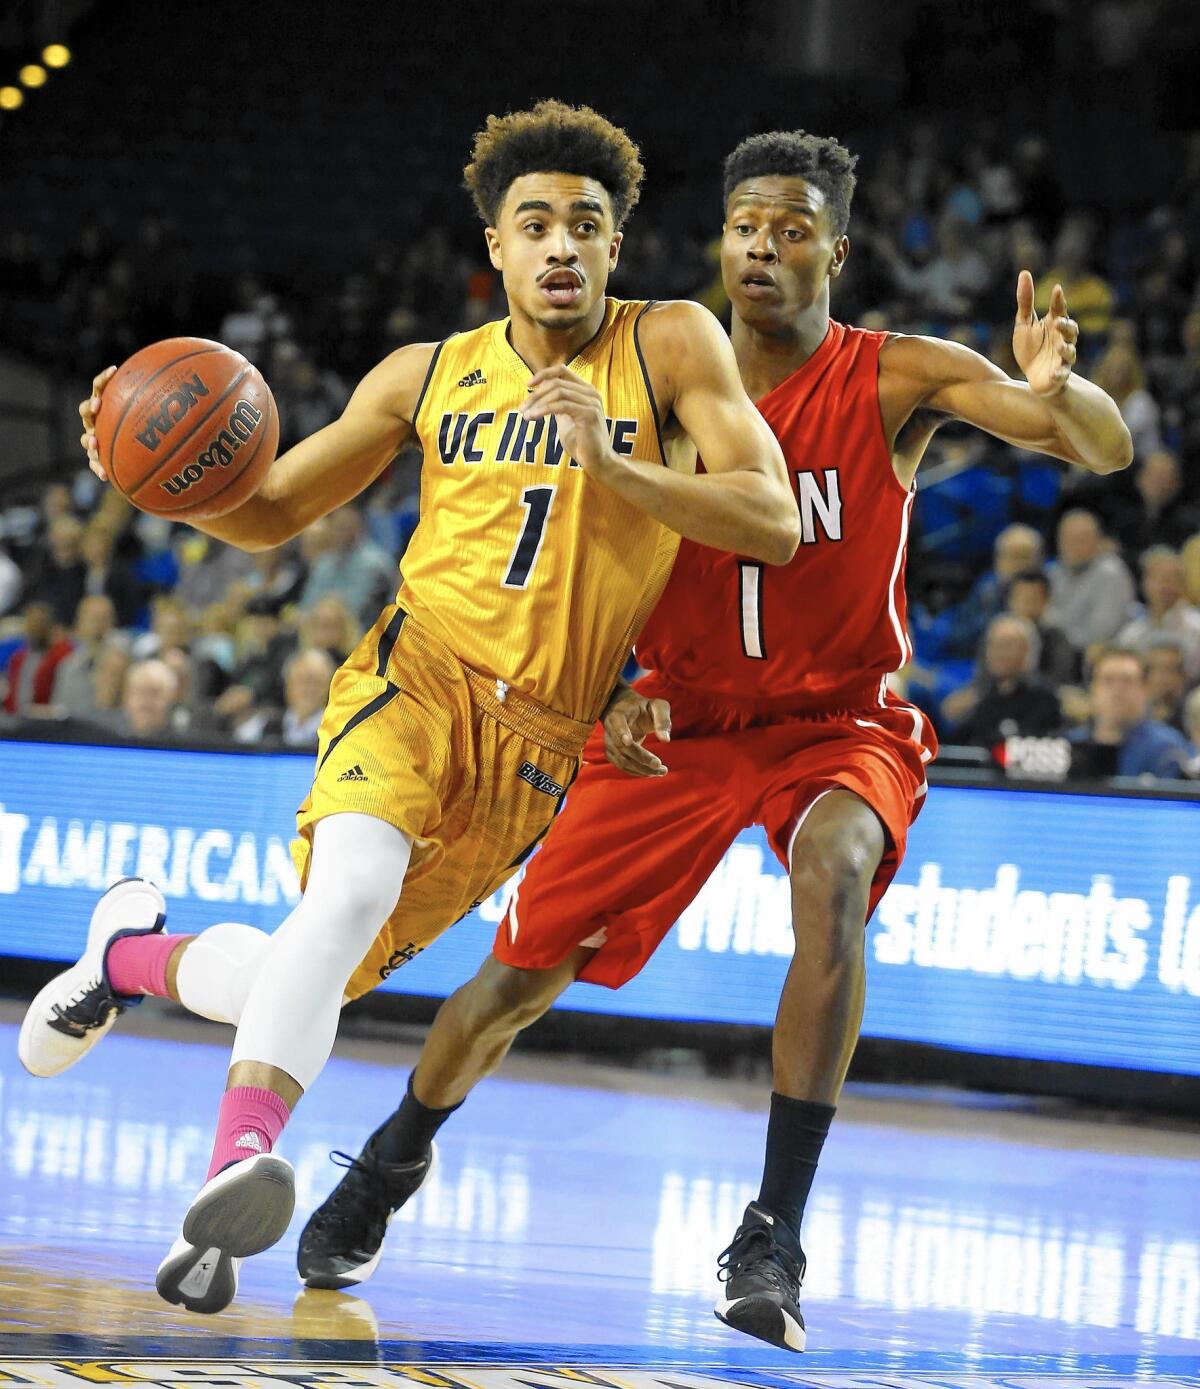 Alex Young, left, owns UC Irvine's career assists record with 551.